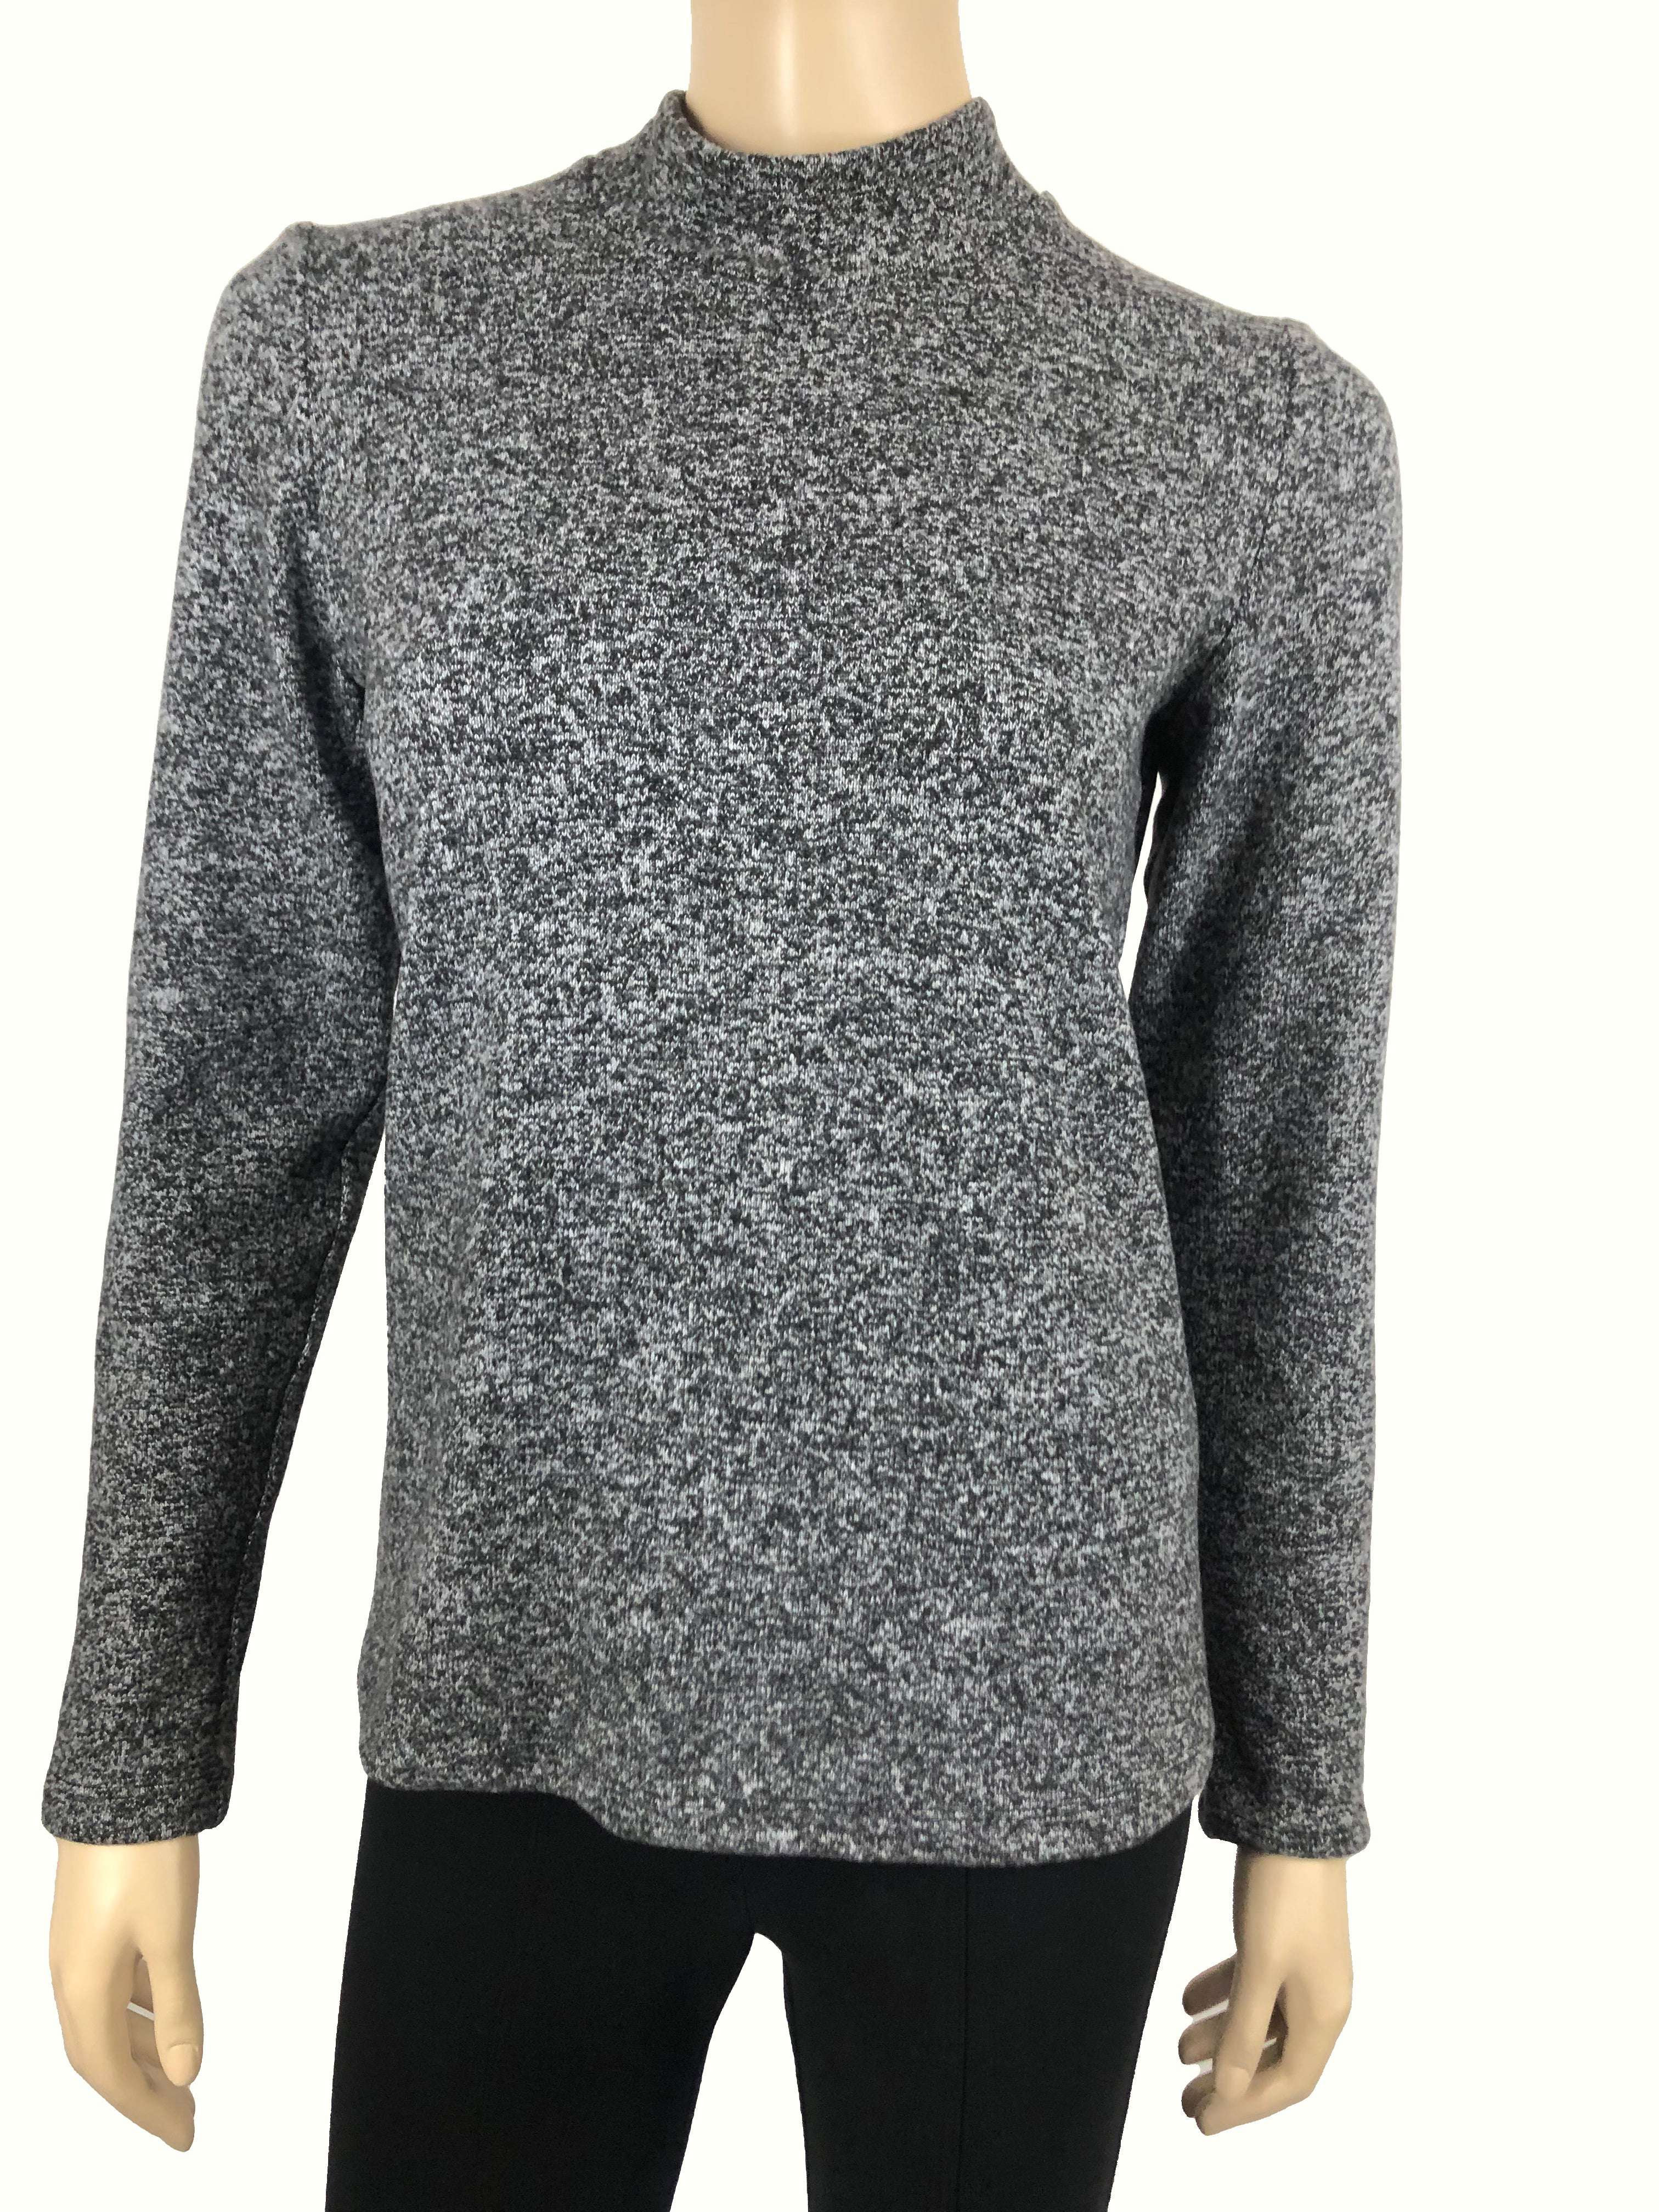 Women's Sweater Grey Mix Soft Knit Fabric - Made In Canada - Yvonne Marie - Yvonne Marie